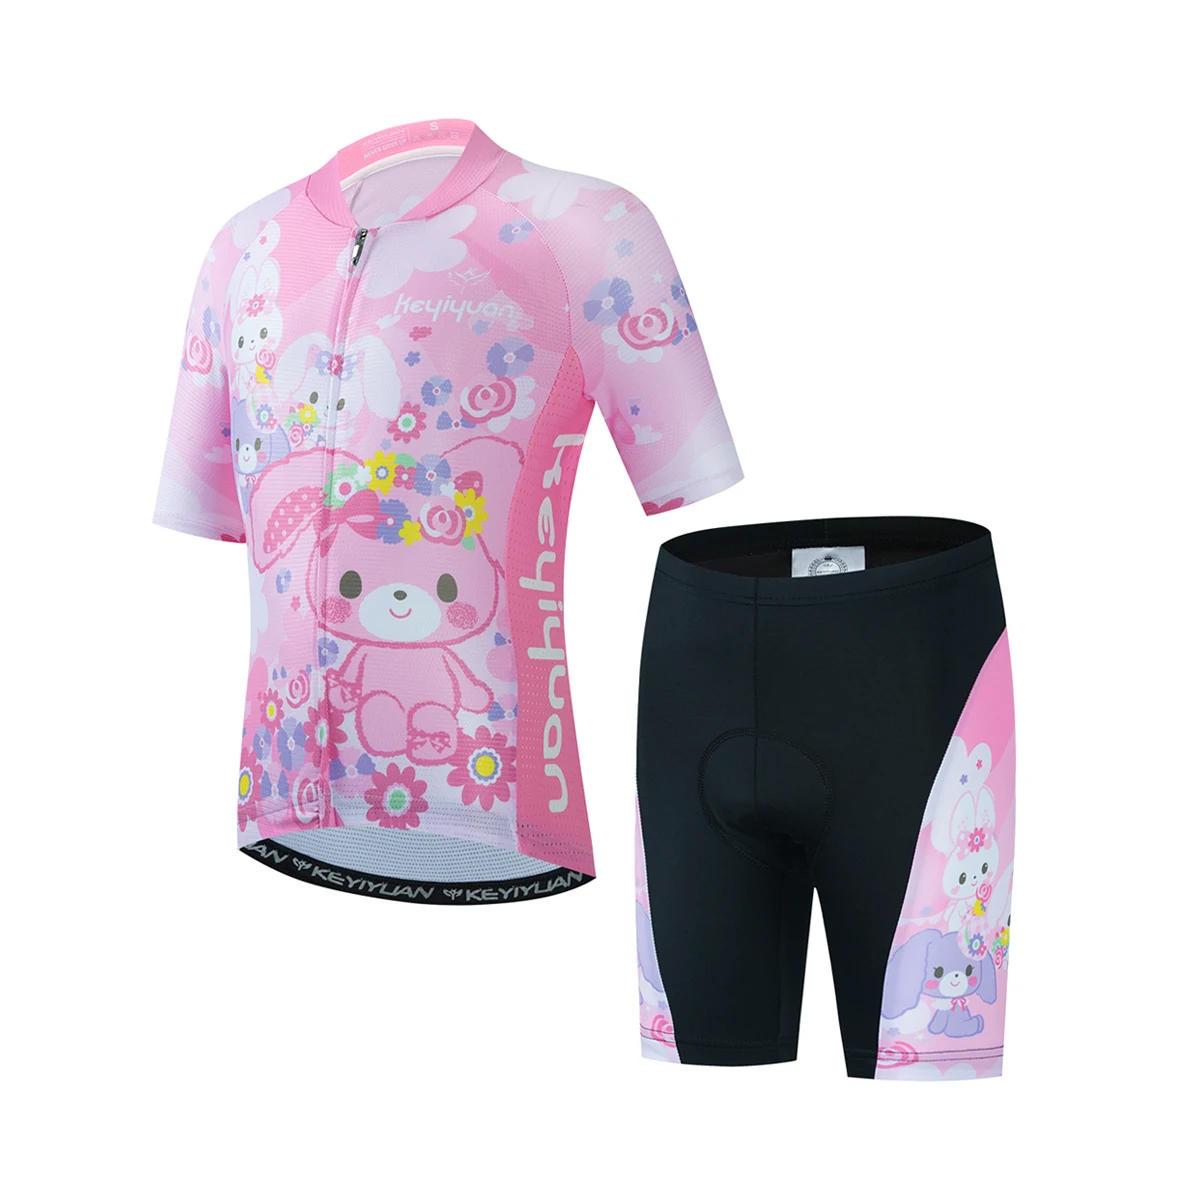 

NEW KEYIYUAN Kids Girls Pink Bicycle Racing Suit Jersey Summer Ciclismo Hombre Bicicleta Infantil Clothing Maillot Ciclismo